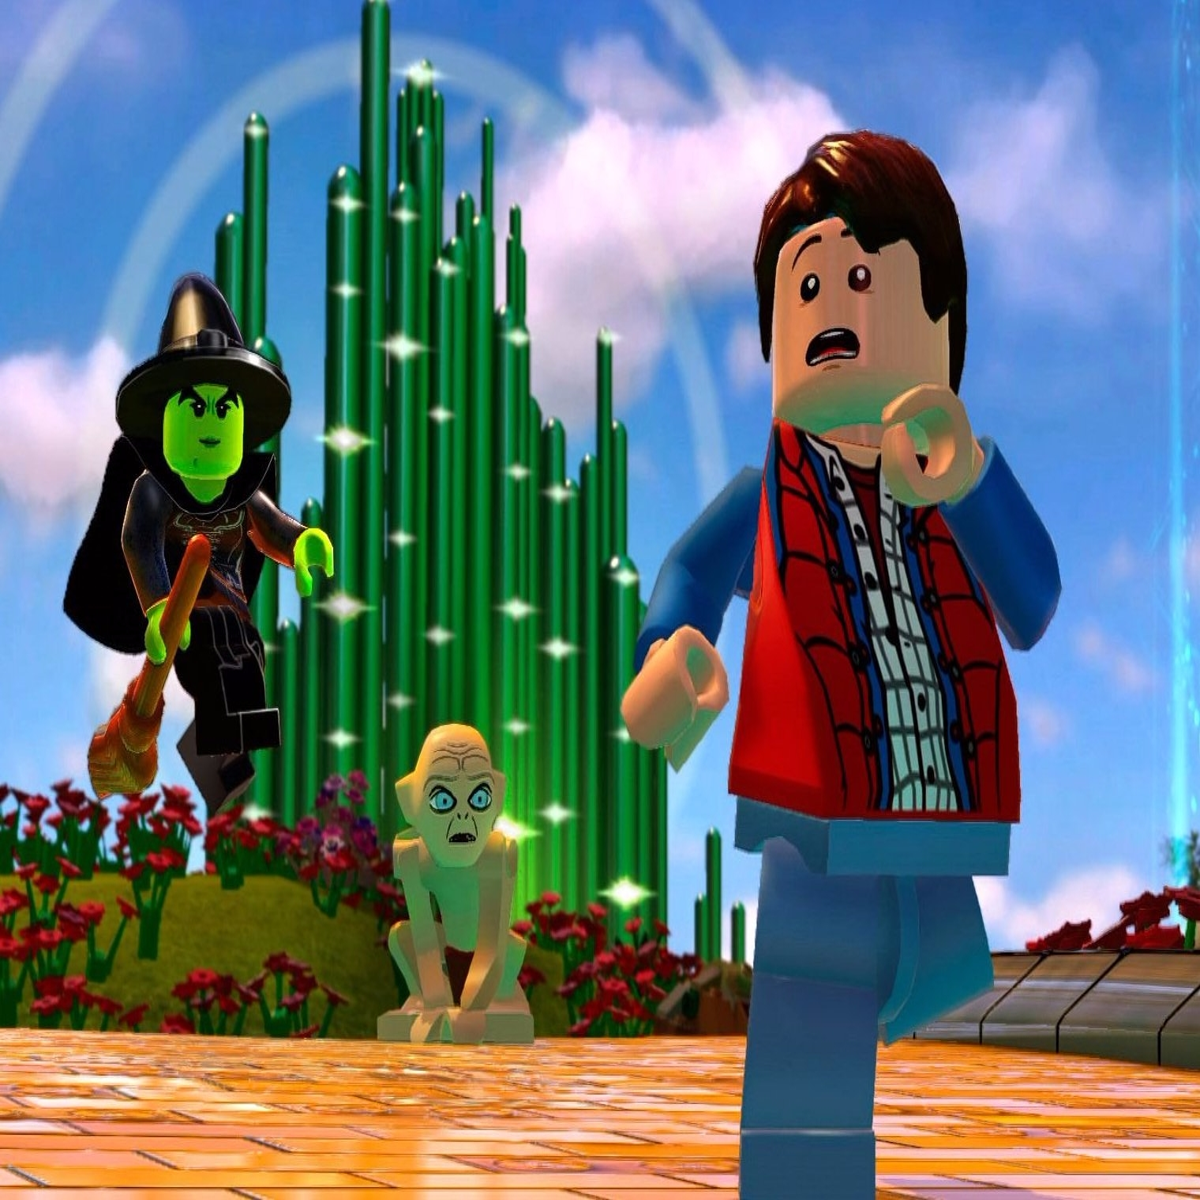 Lego Dimensions has a three year plan for more levels and